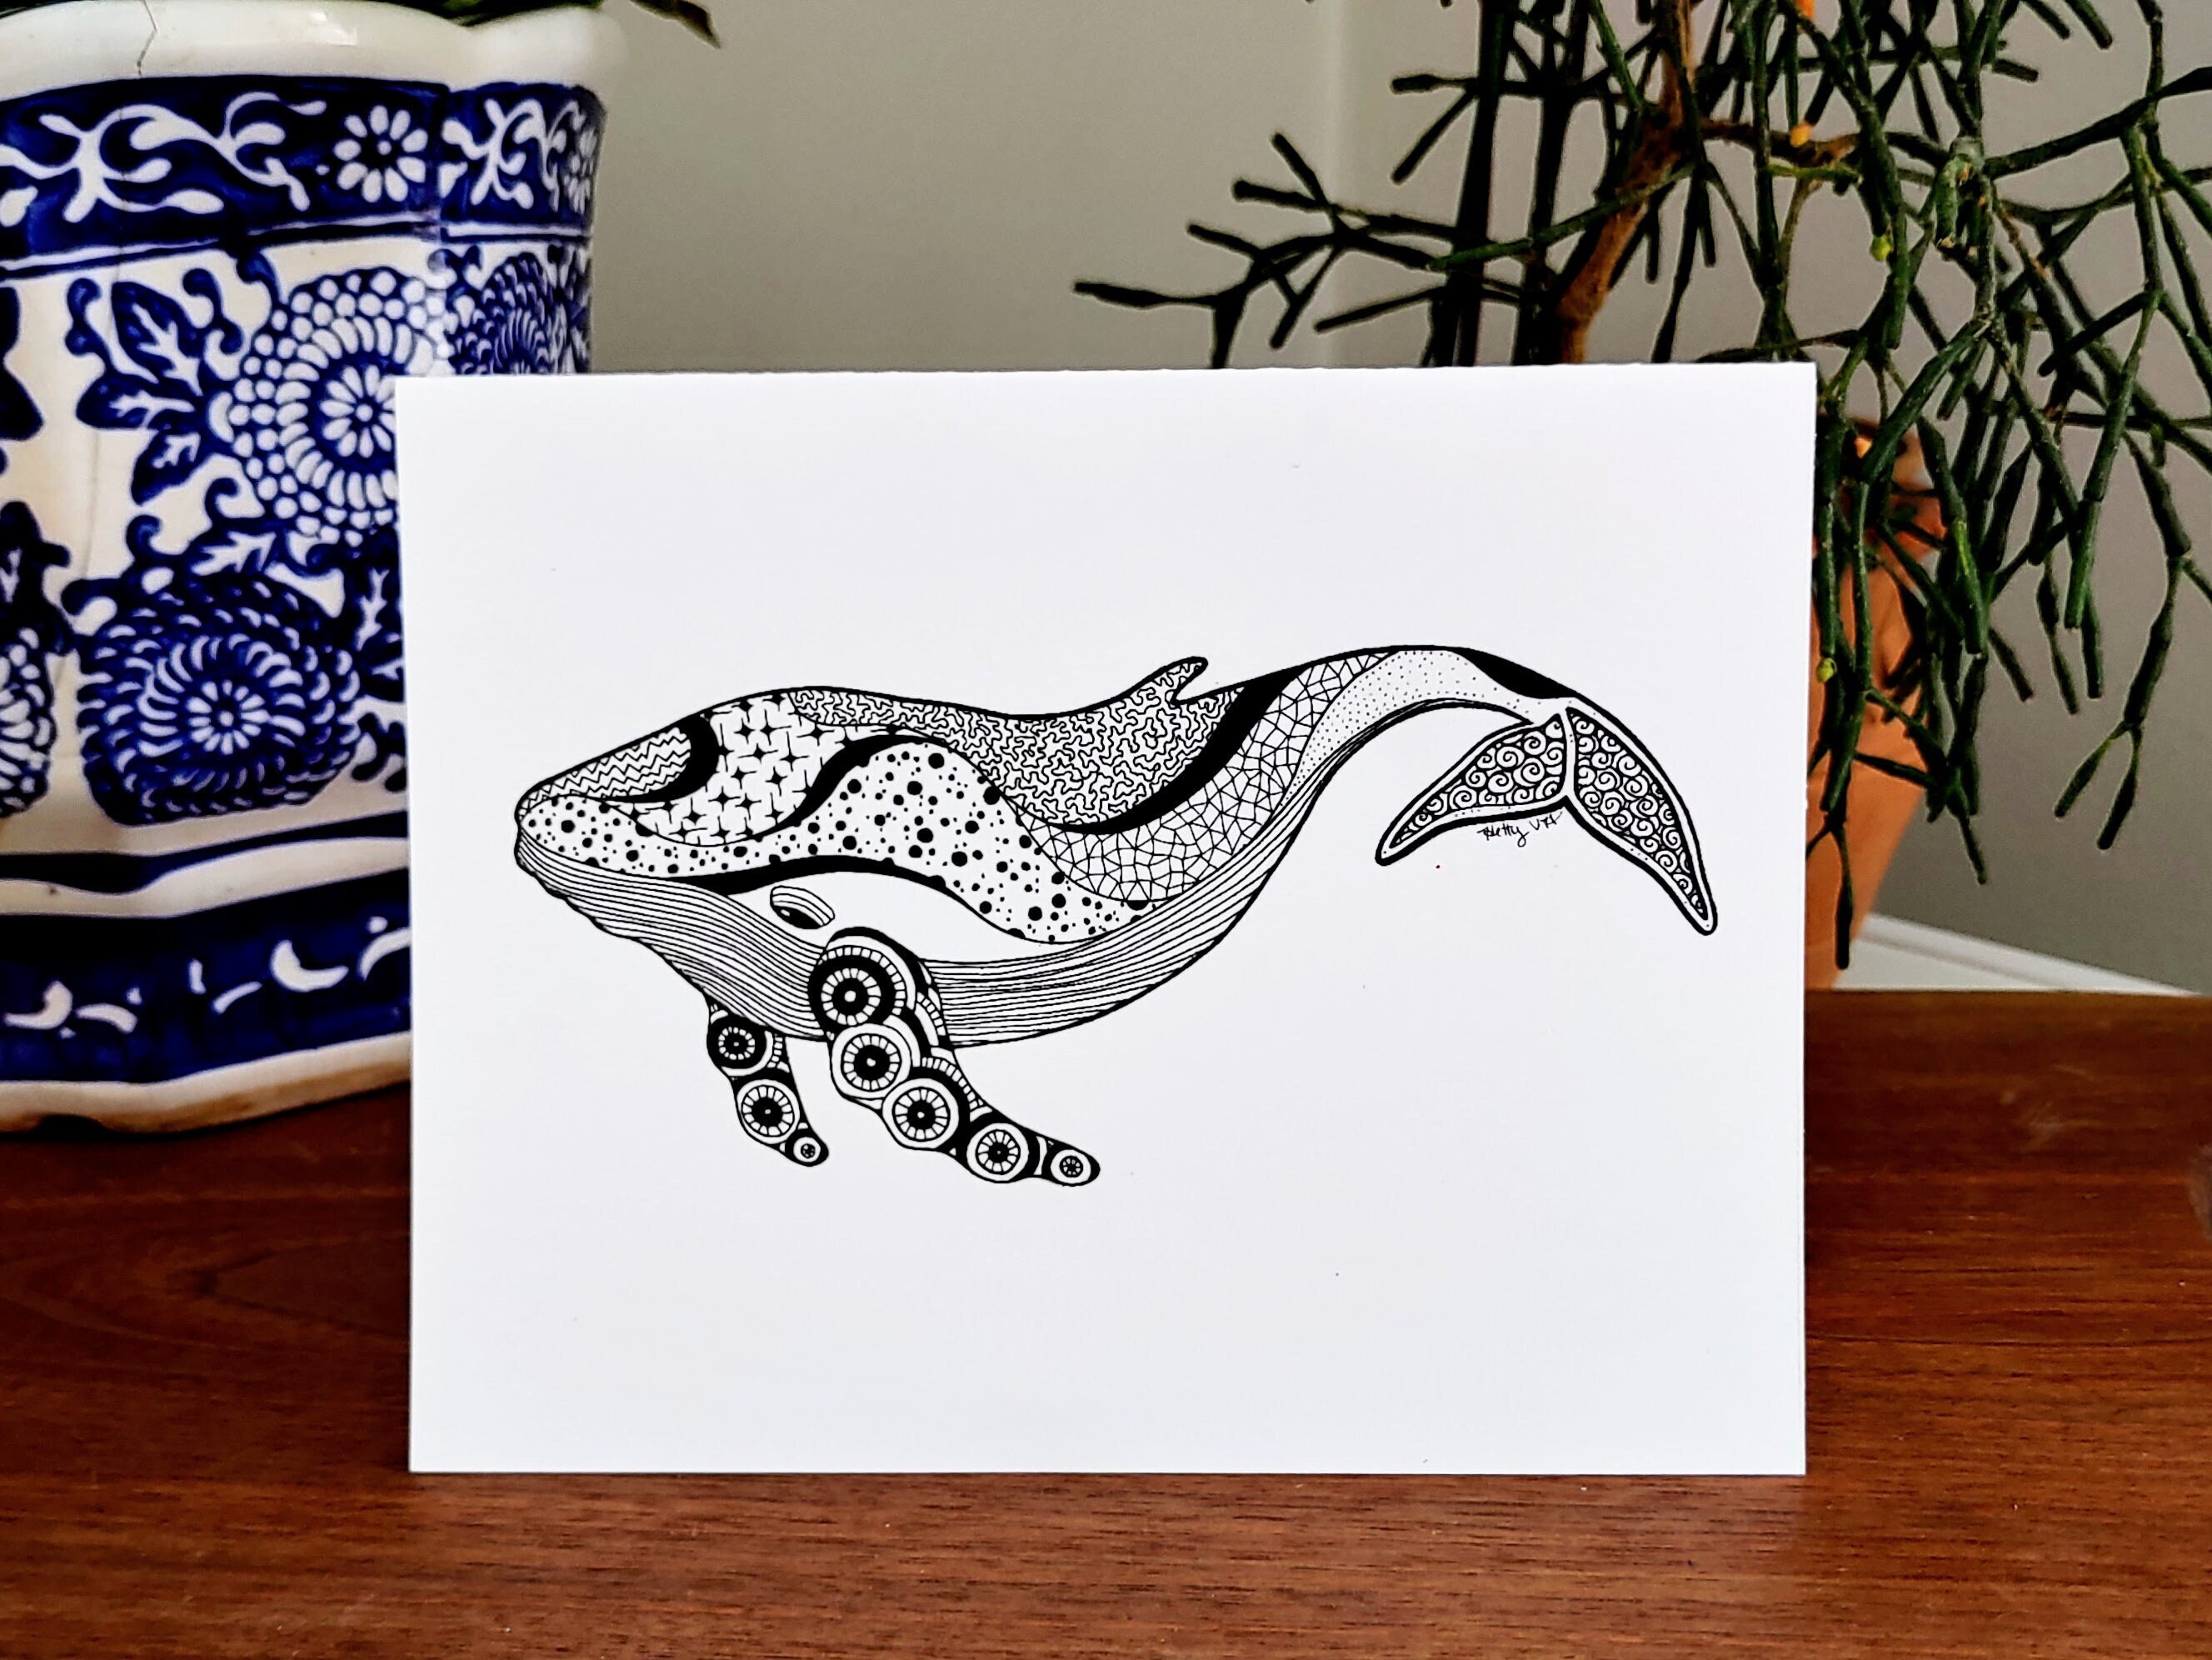 Black and White Zentangle Pen Design Greeting Card for Sale by  CosmicHeartSeed